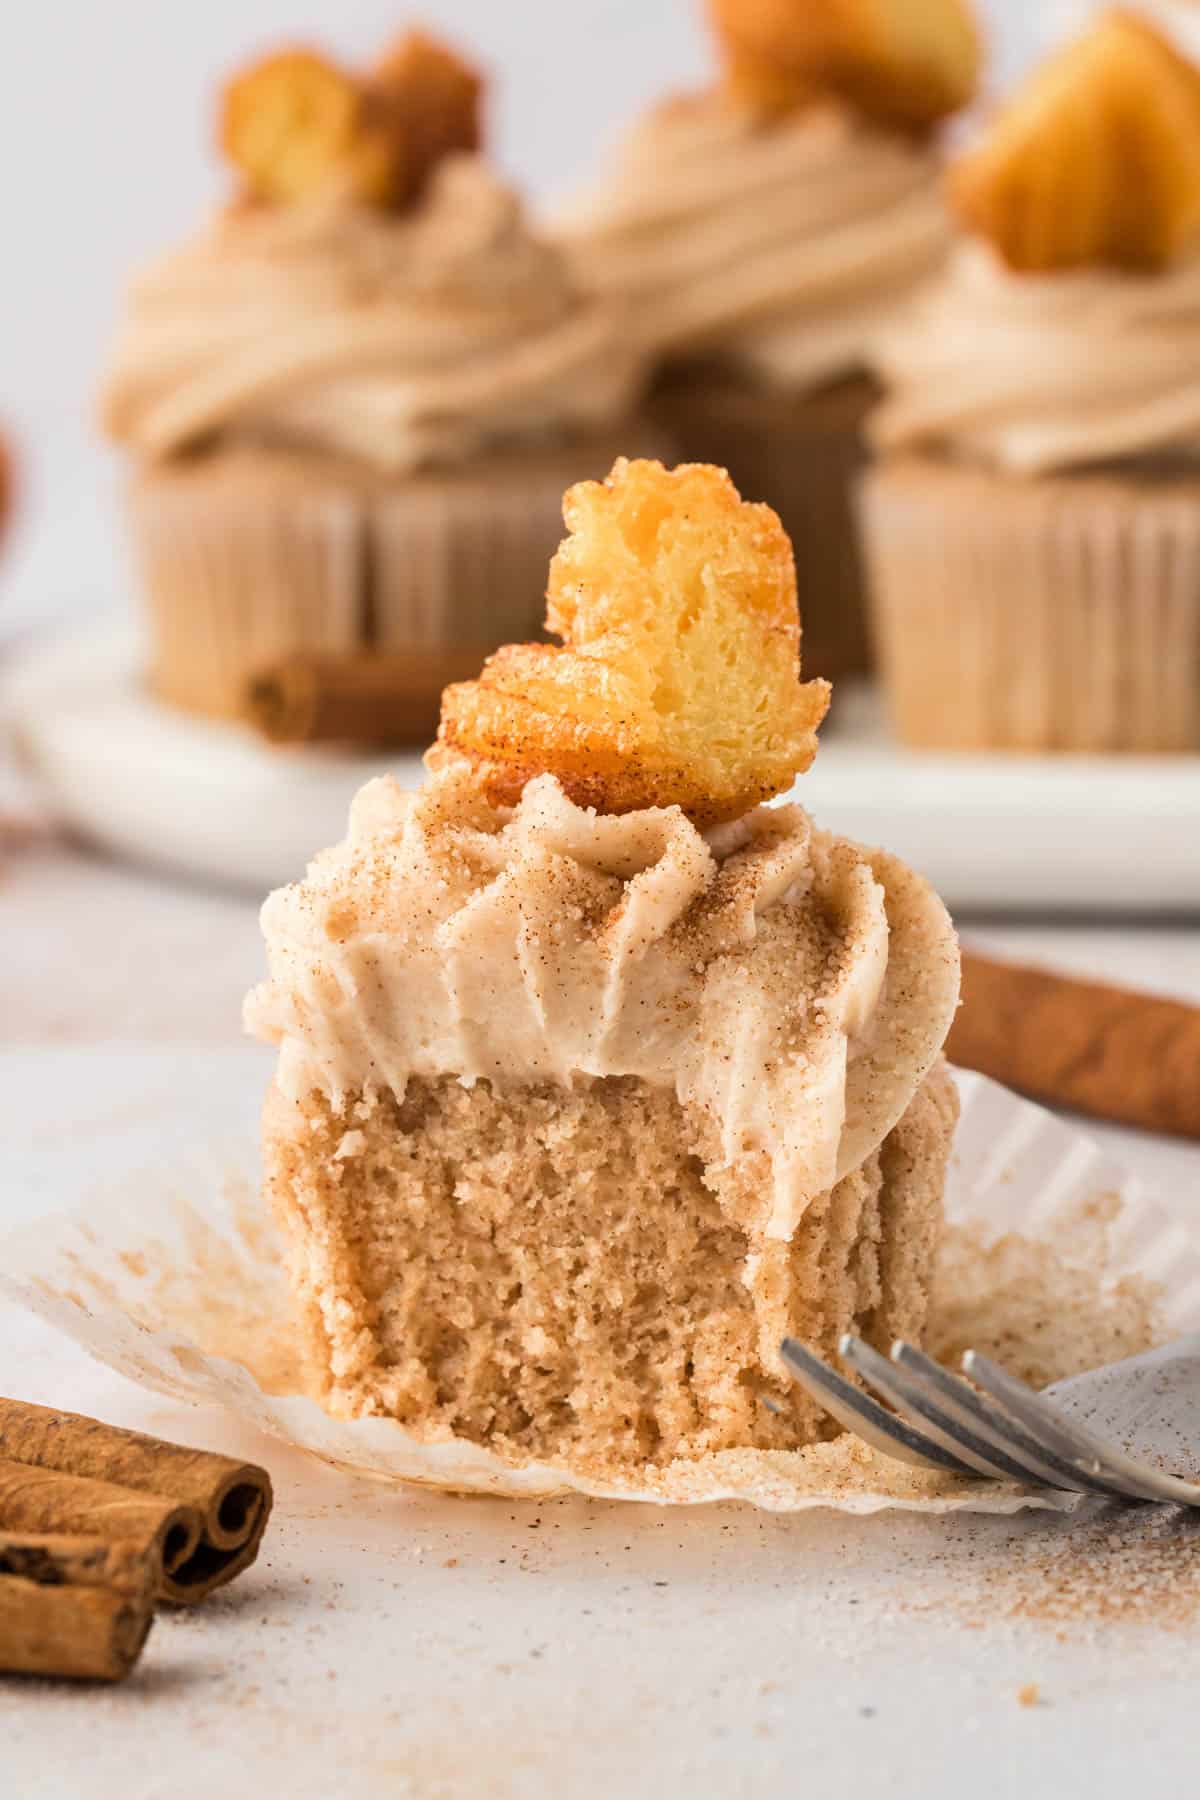 a churro cupcake in an open muffin liner with a fork laying by it and a bit taken out of the cupcake by a fork, surrounded by cinnamon sticks and a dust of cinnamon sugar and more cupcakes in the background